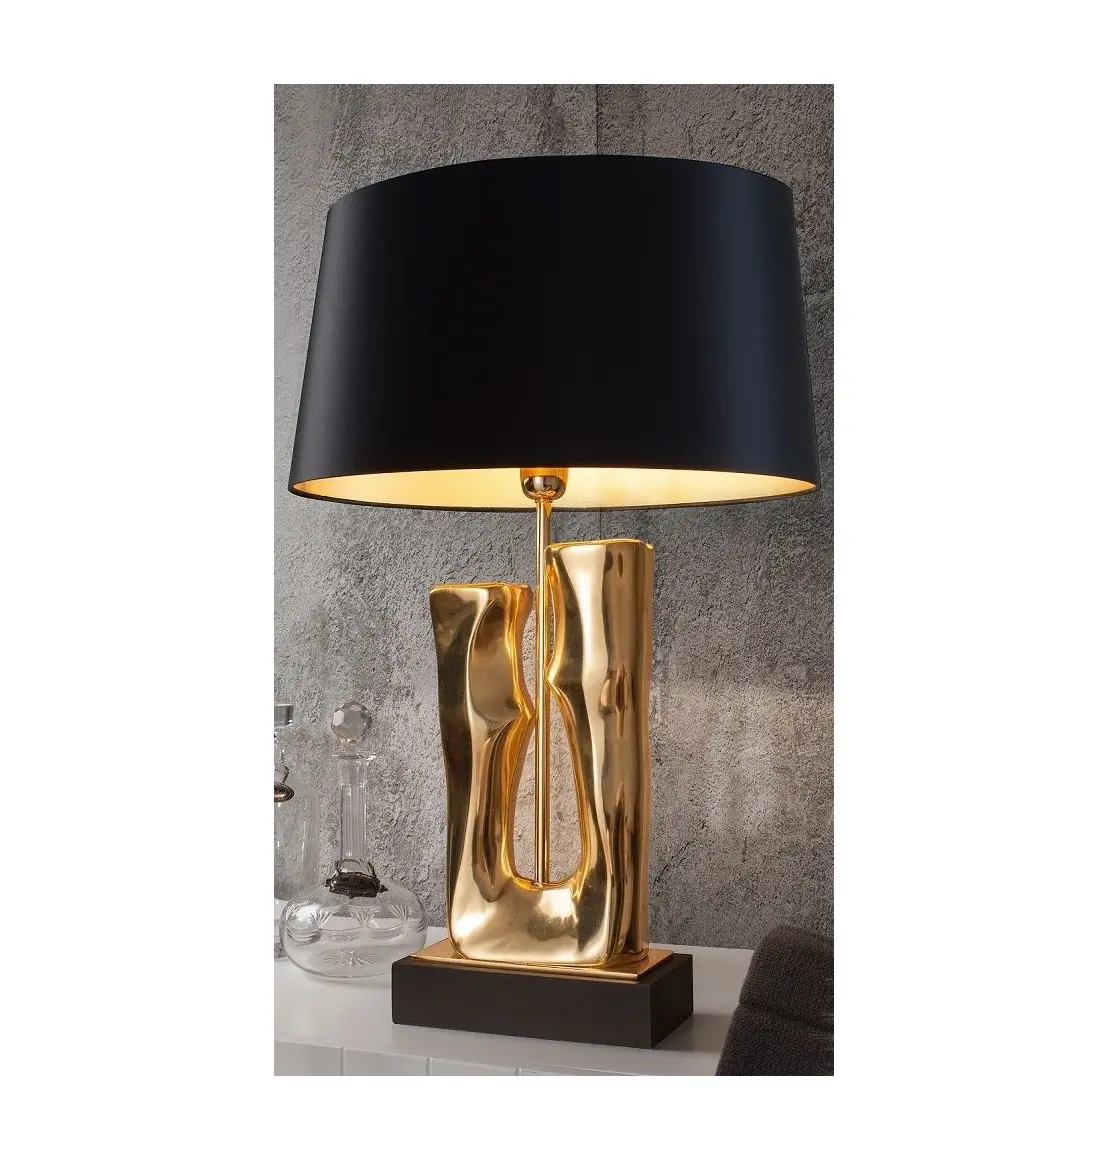 Antique Black Shade Metal Base Decorative Table Lamps Supplier at Low Price New Design Handmade Metal Table Lamps Exporter